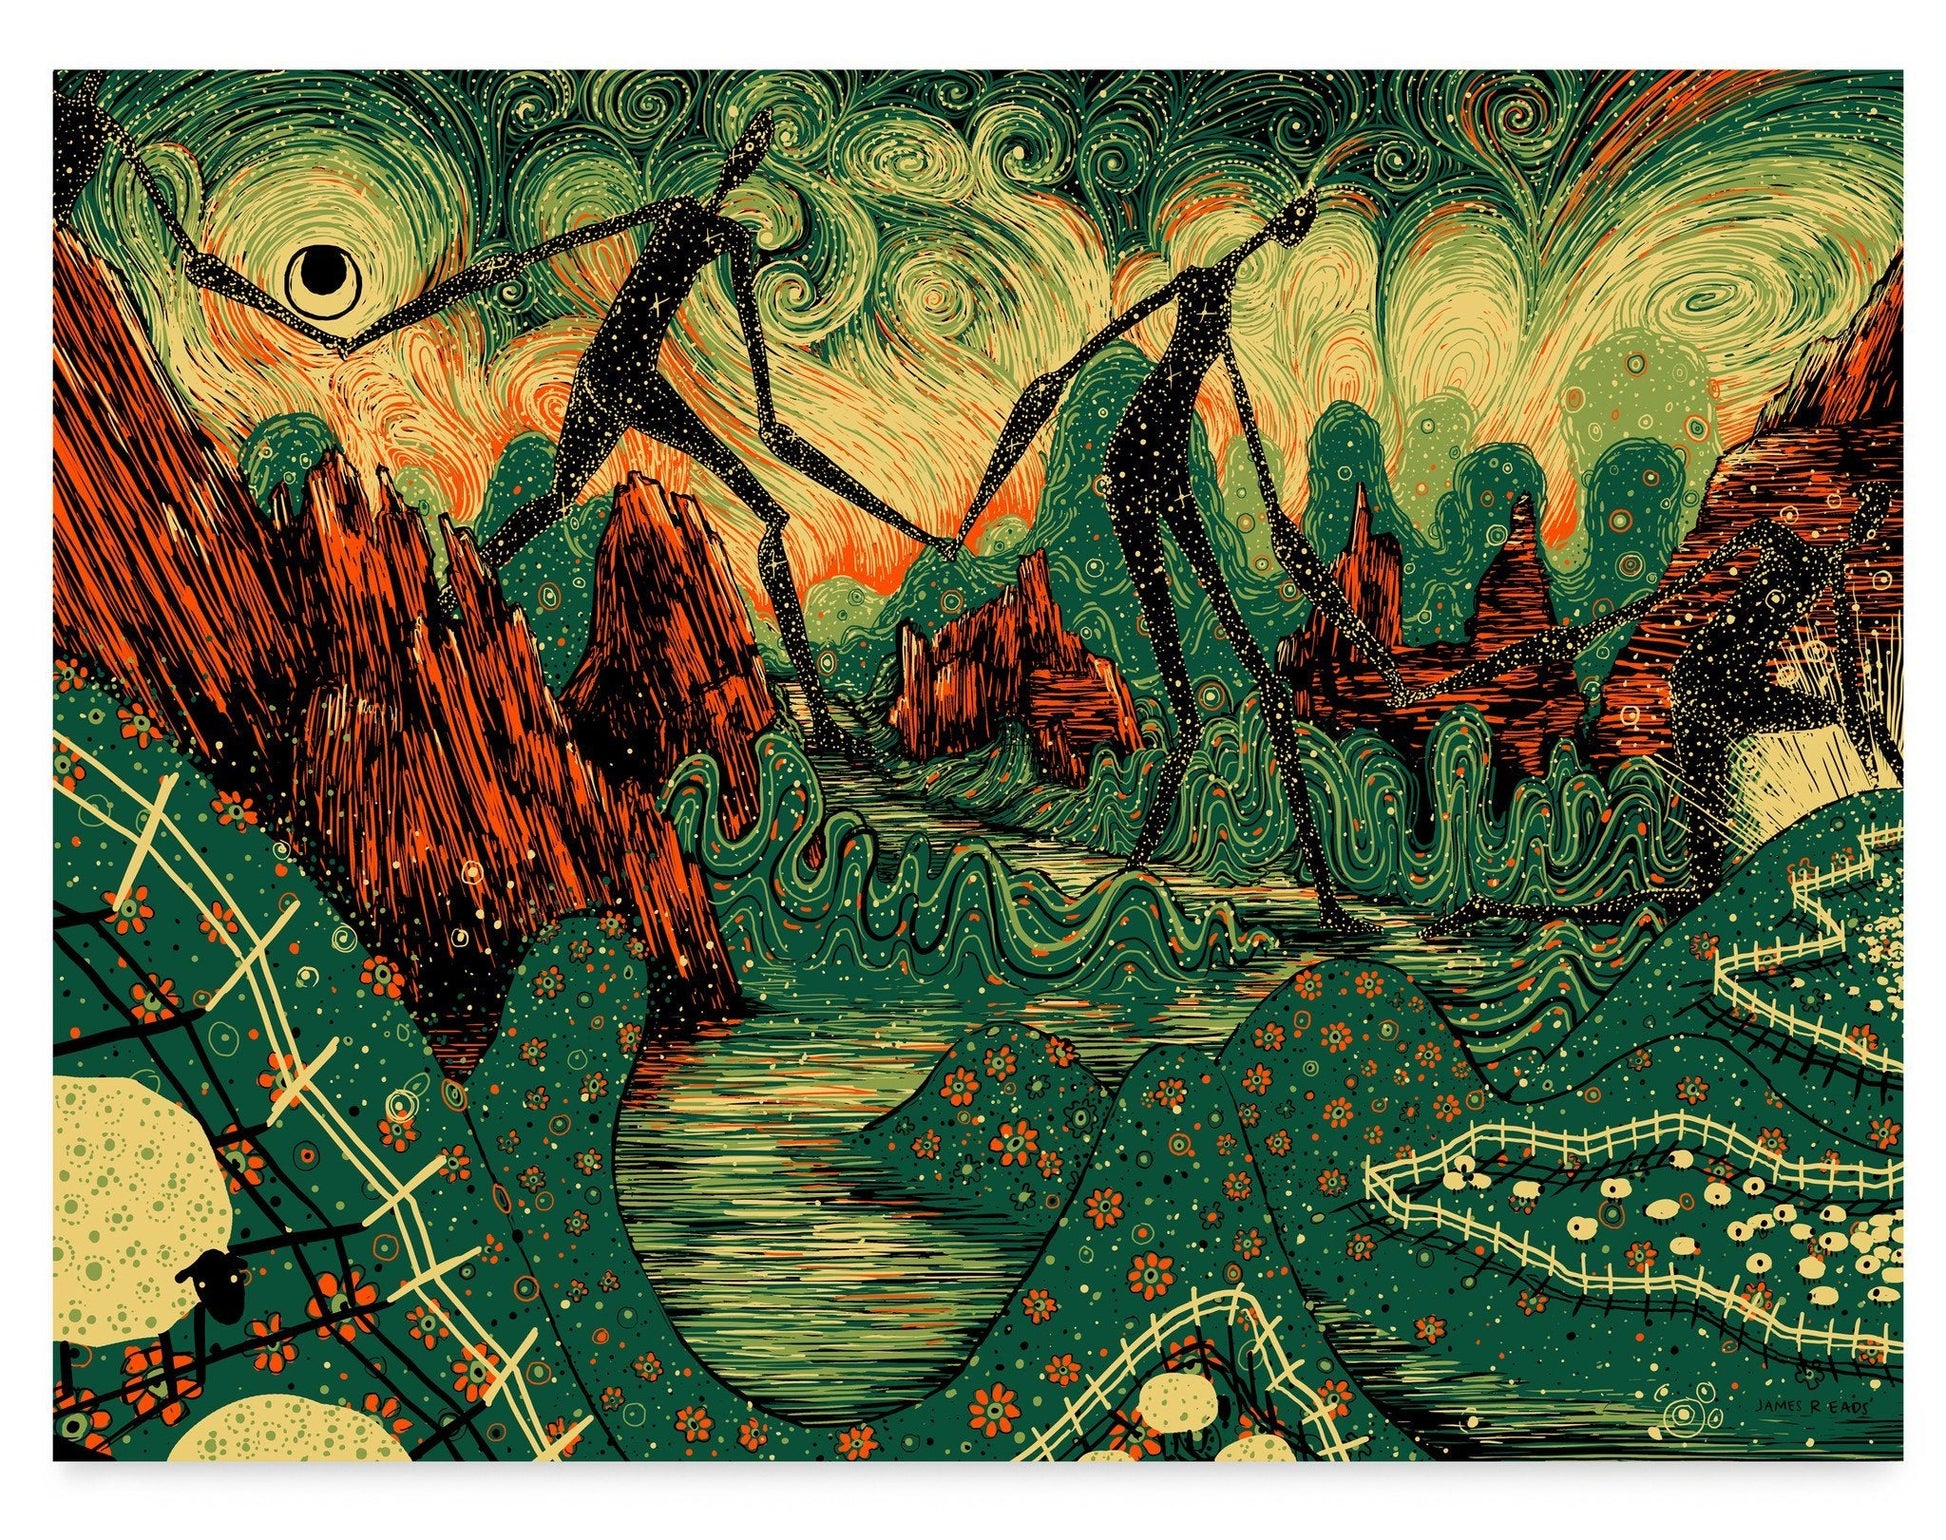 Four Giants (Limited Edition of 80) Print James R. Eads